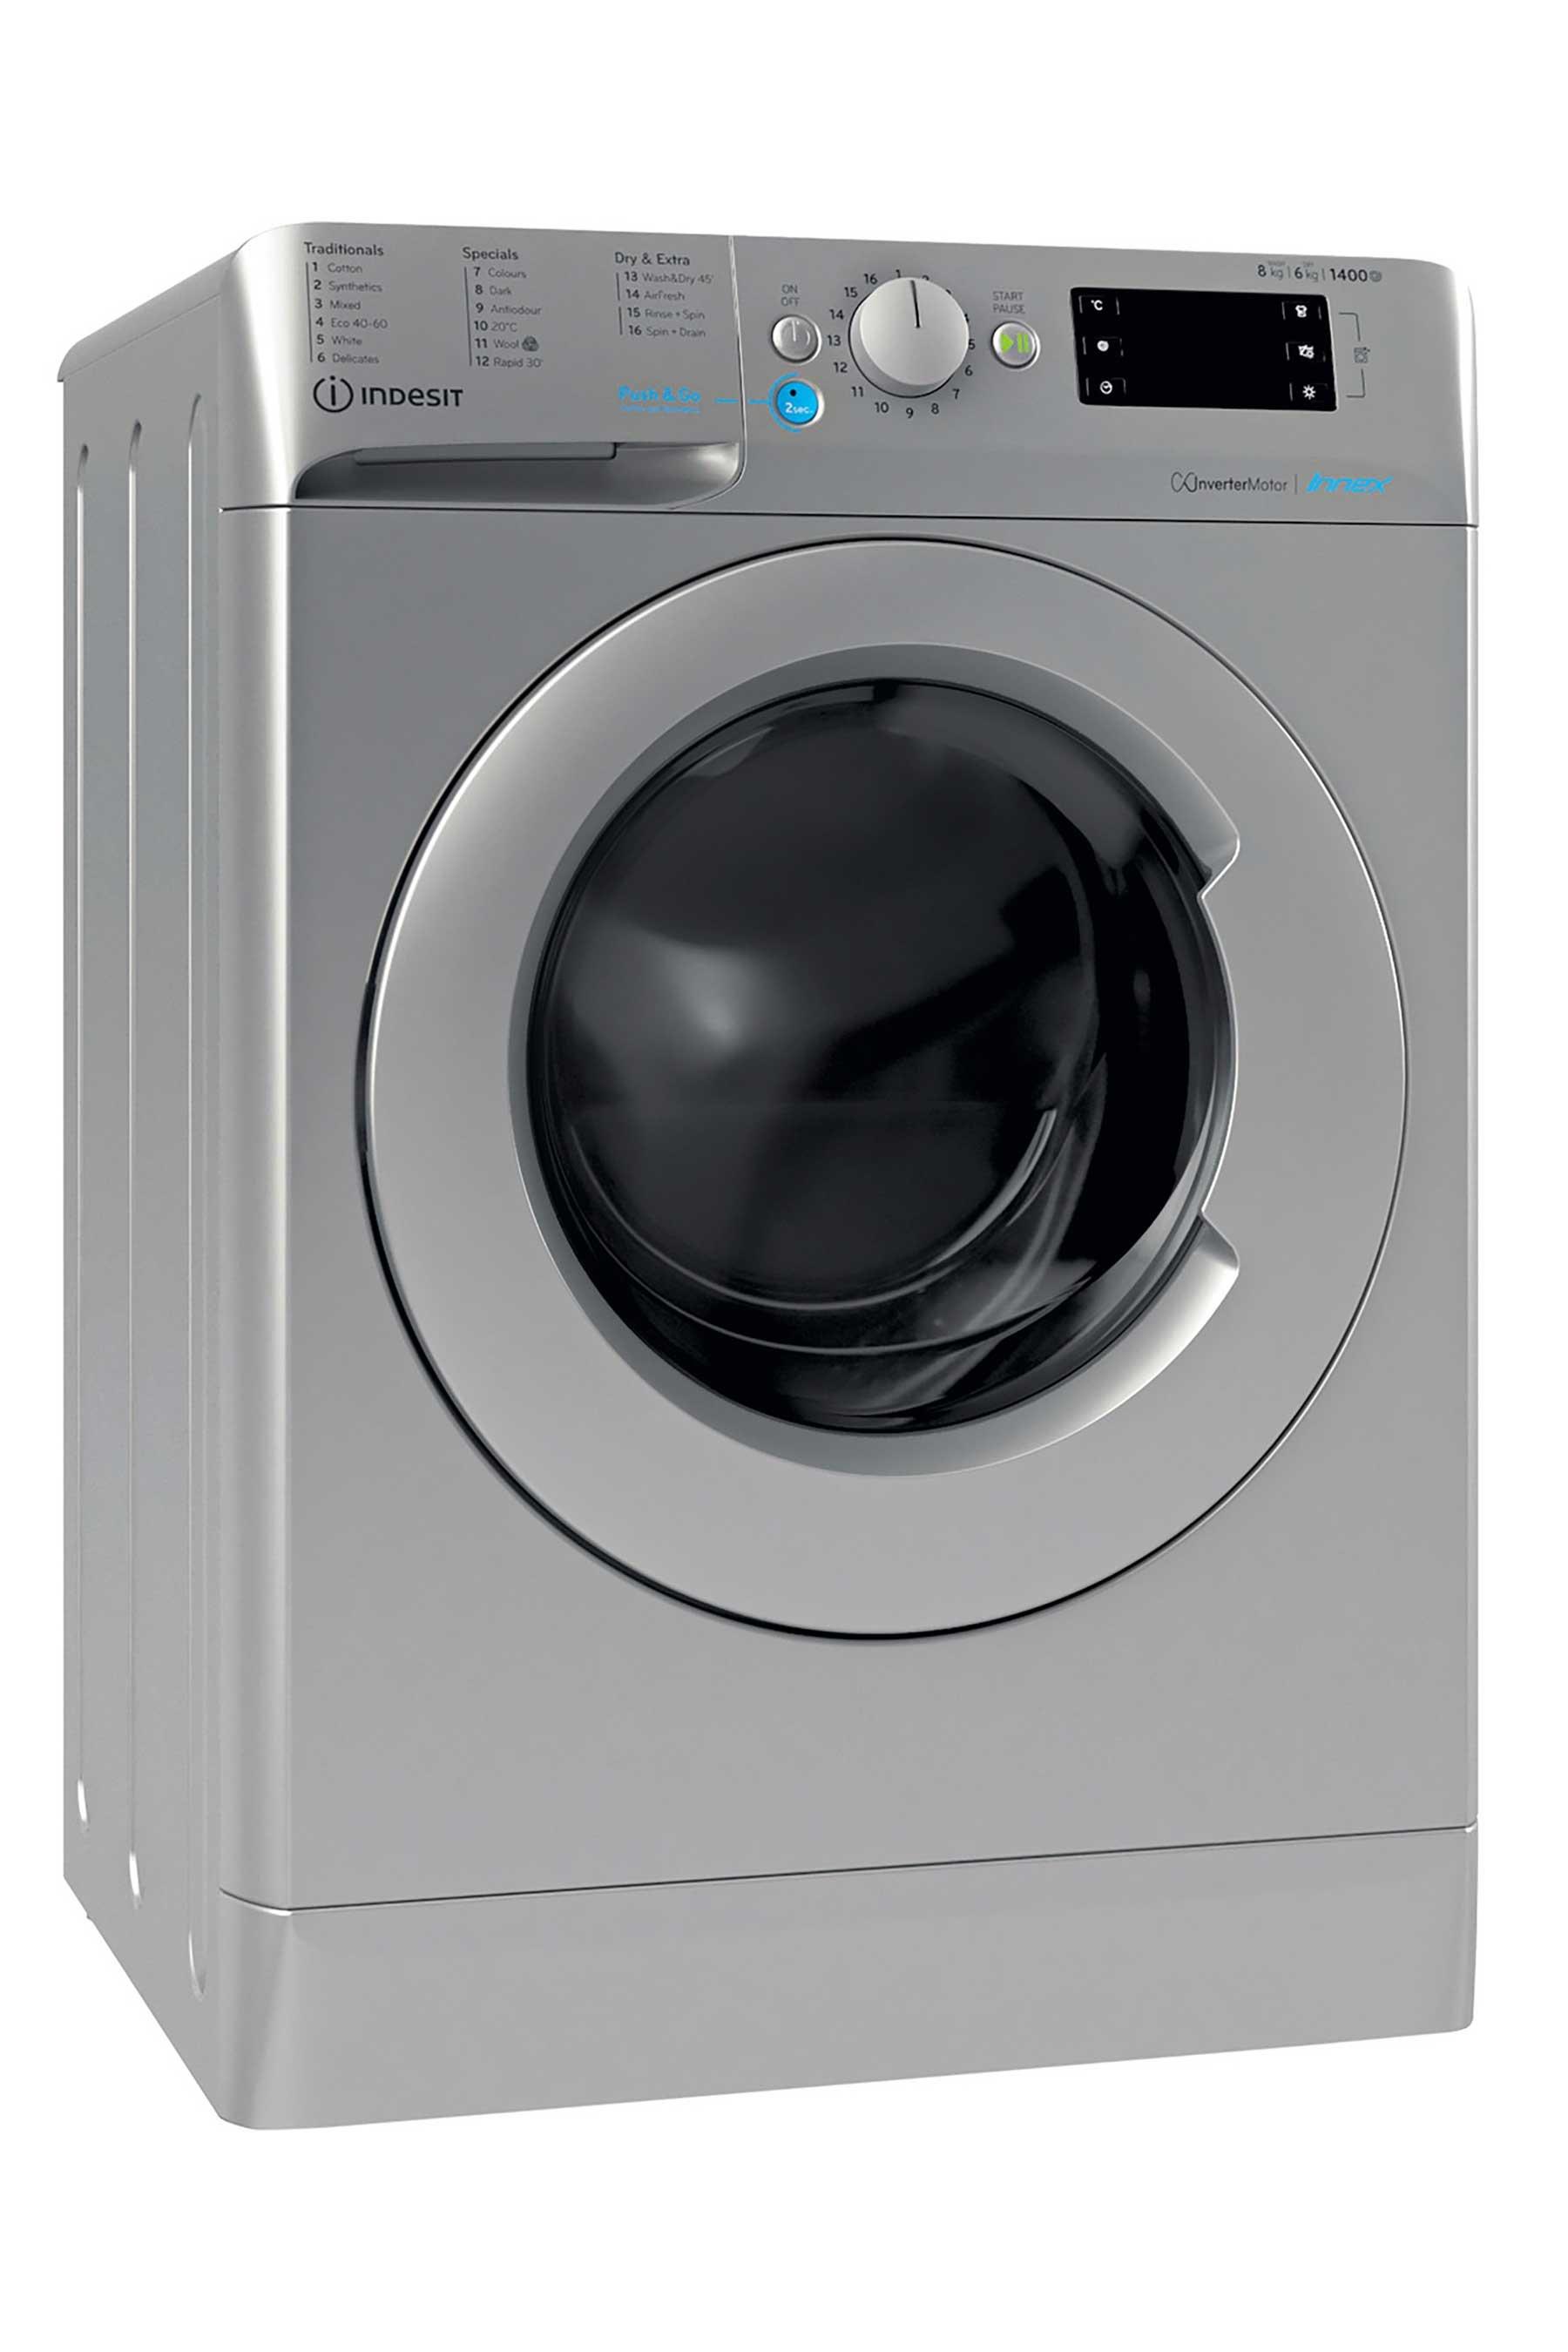 Indesit Push&Wash: One-Button Operation for Simple Laundry